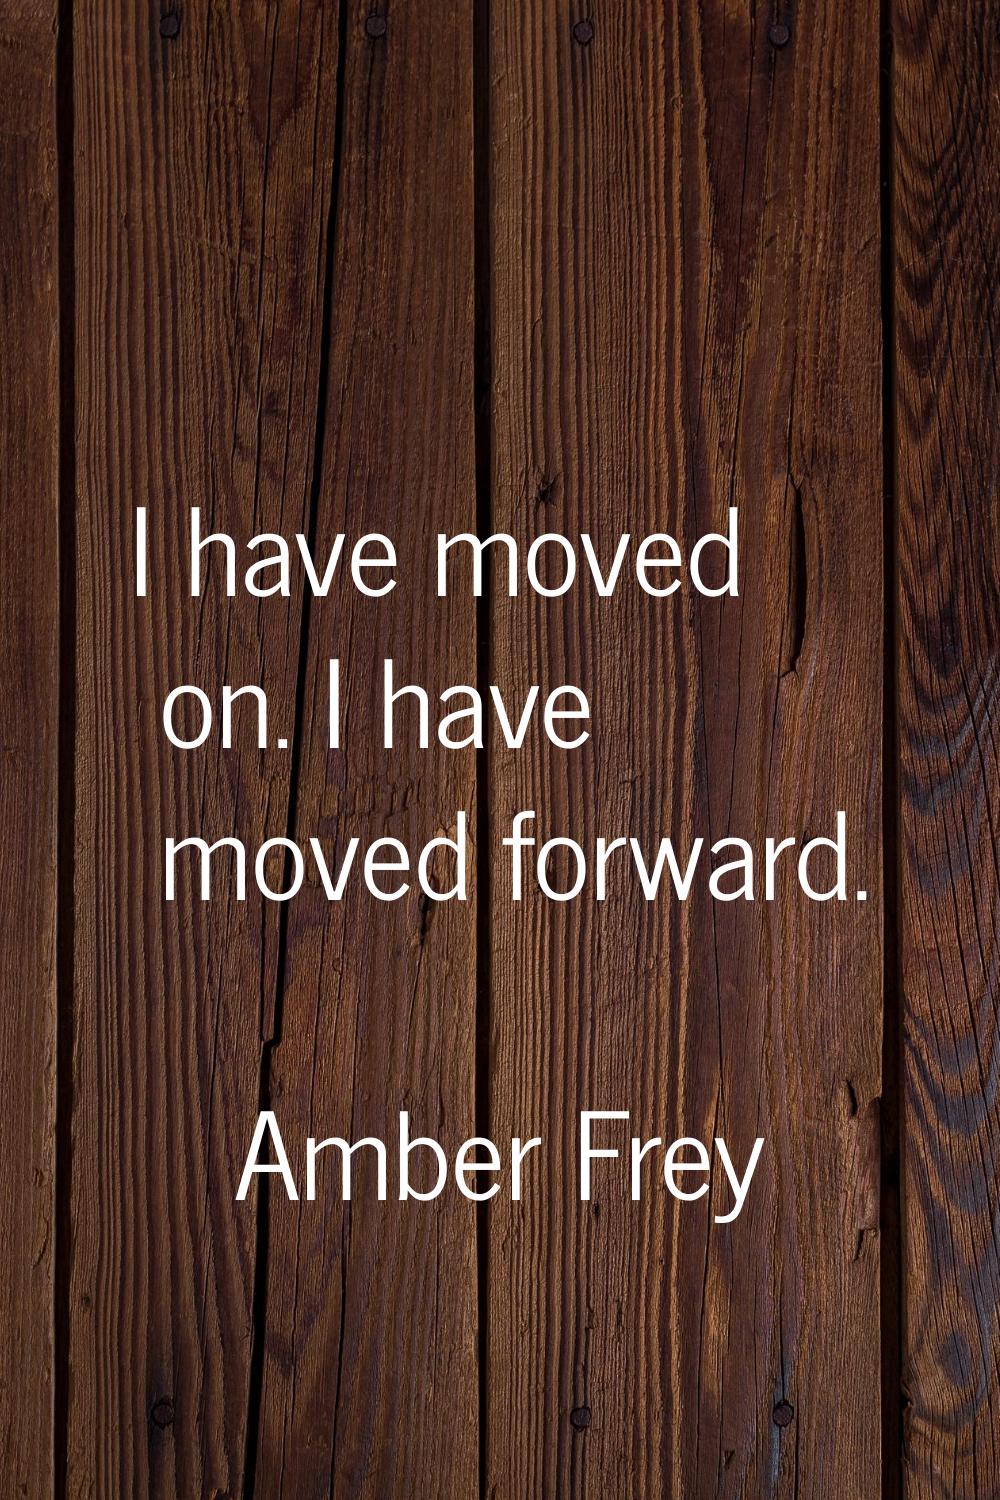 I have moved on. I have moved forward.